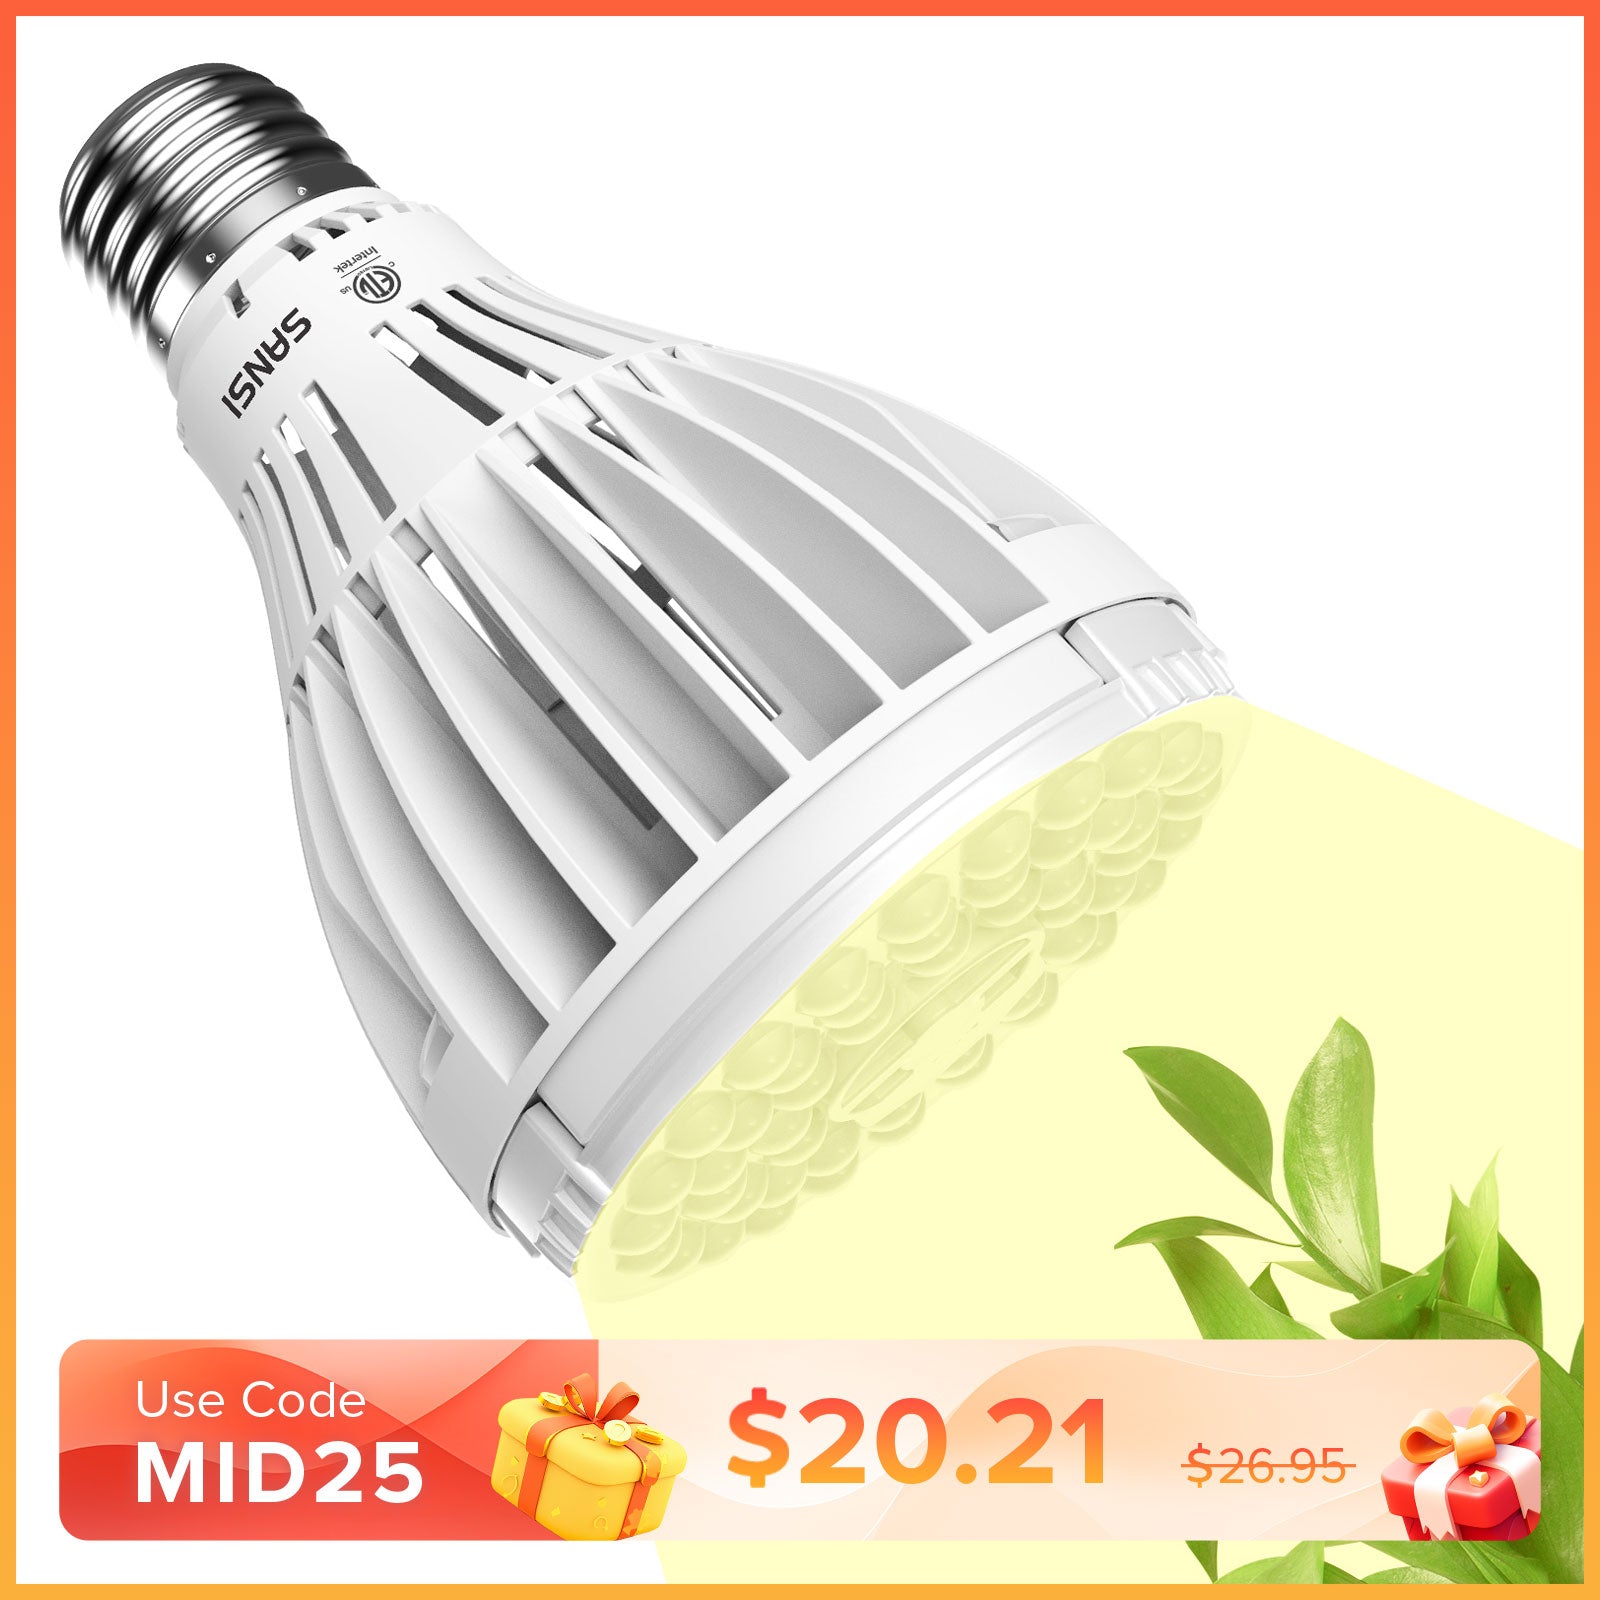 PAR25 24W LED Grow Light Bulb for Seeds and Greens(US ONLY)